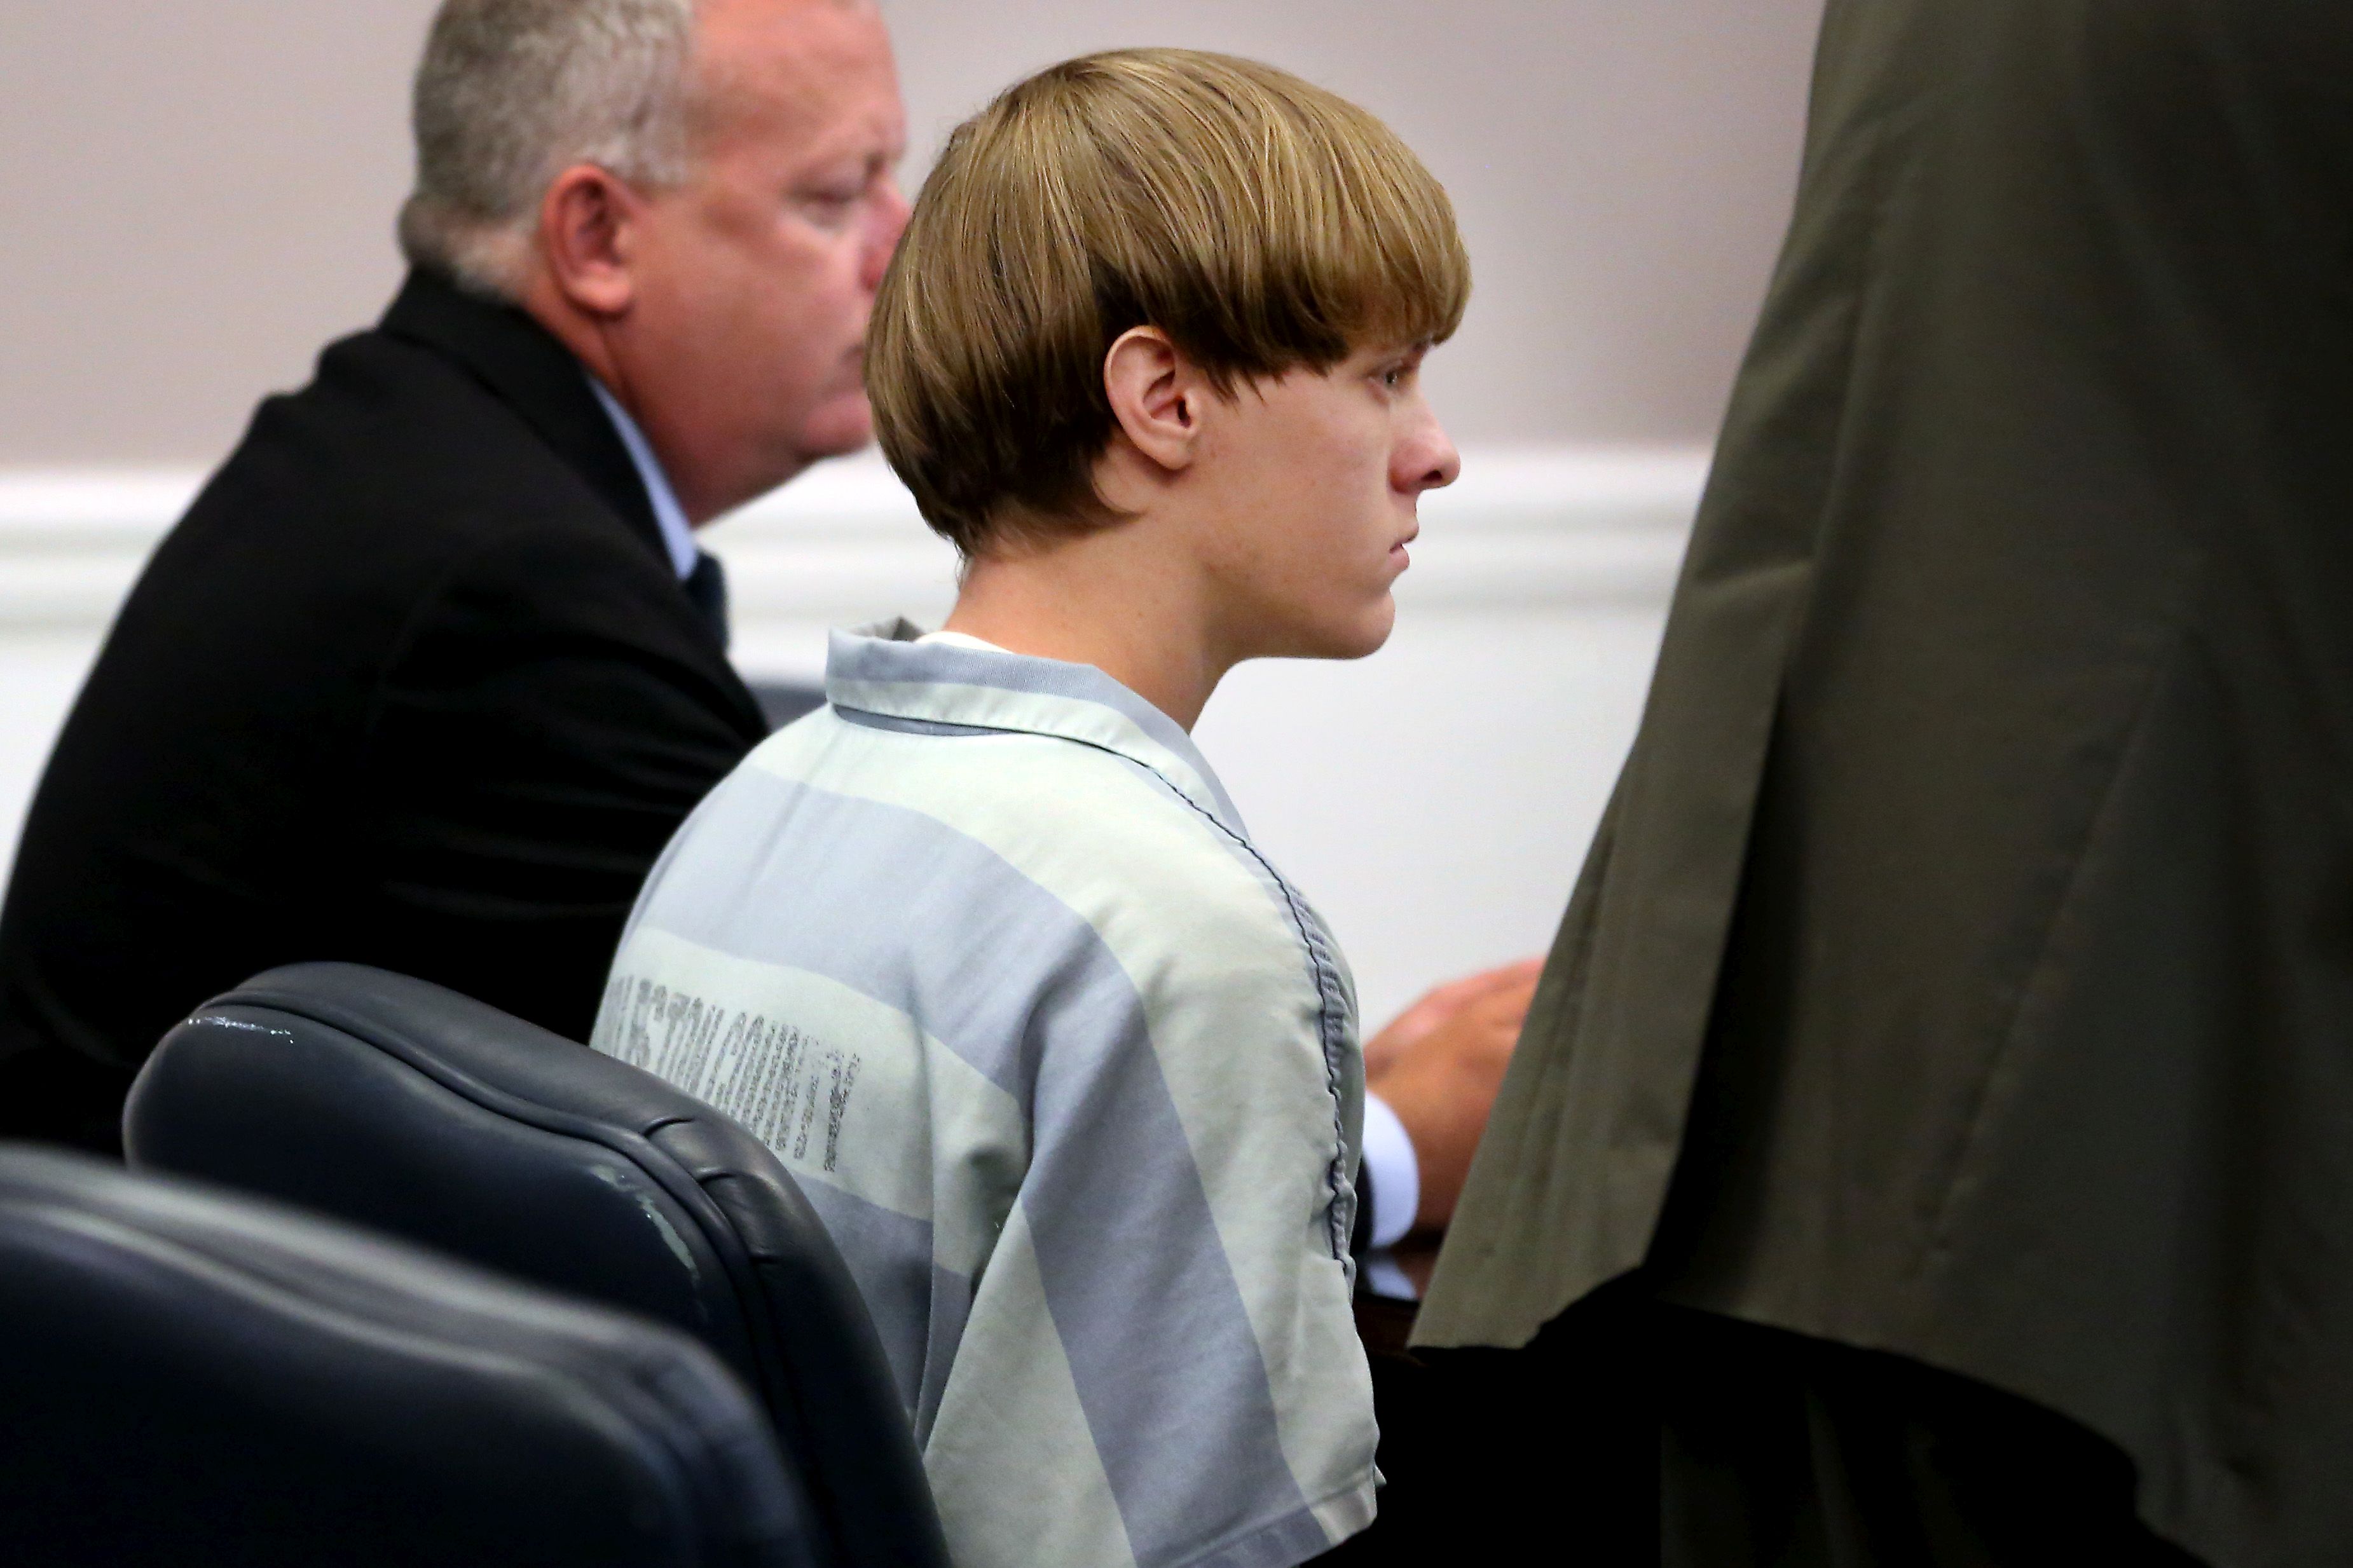 Dylan Roof (C), the suspect in the mass shooting that left nine dead in a Charleston church appears in court in Charleston, S.C., on July 18, 2015.